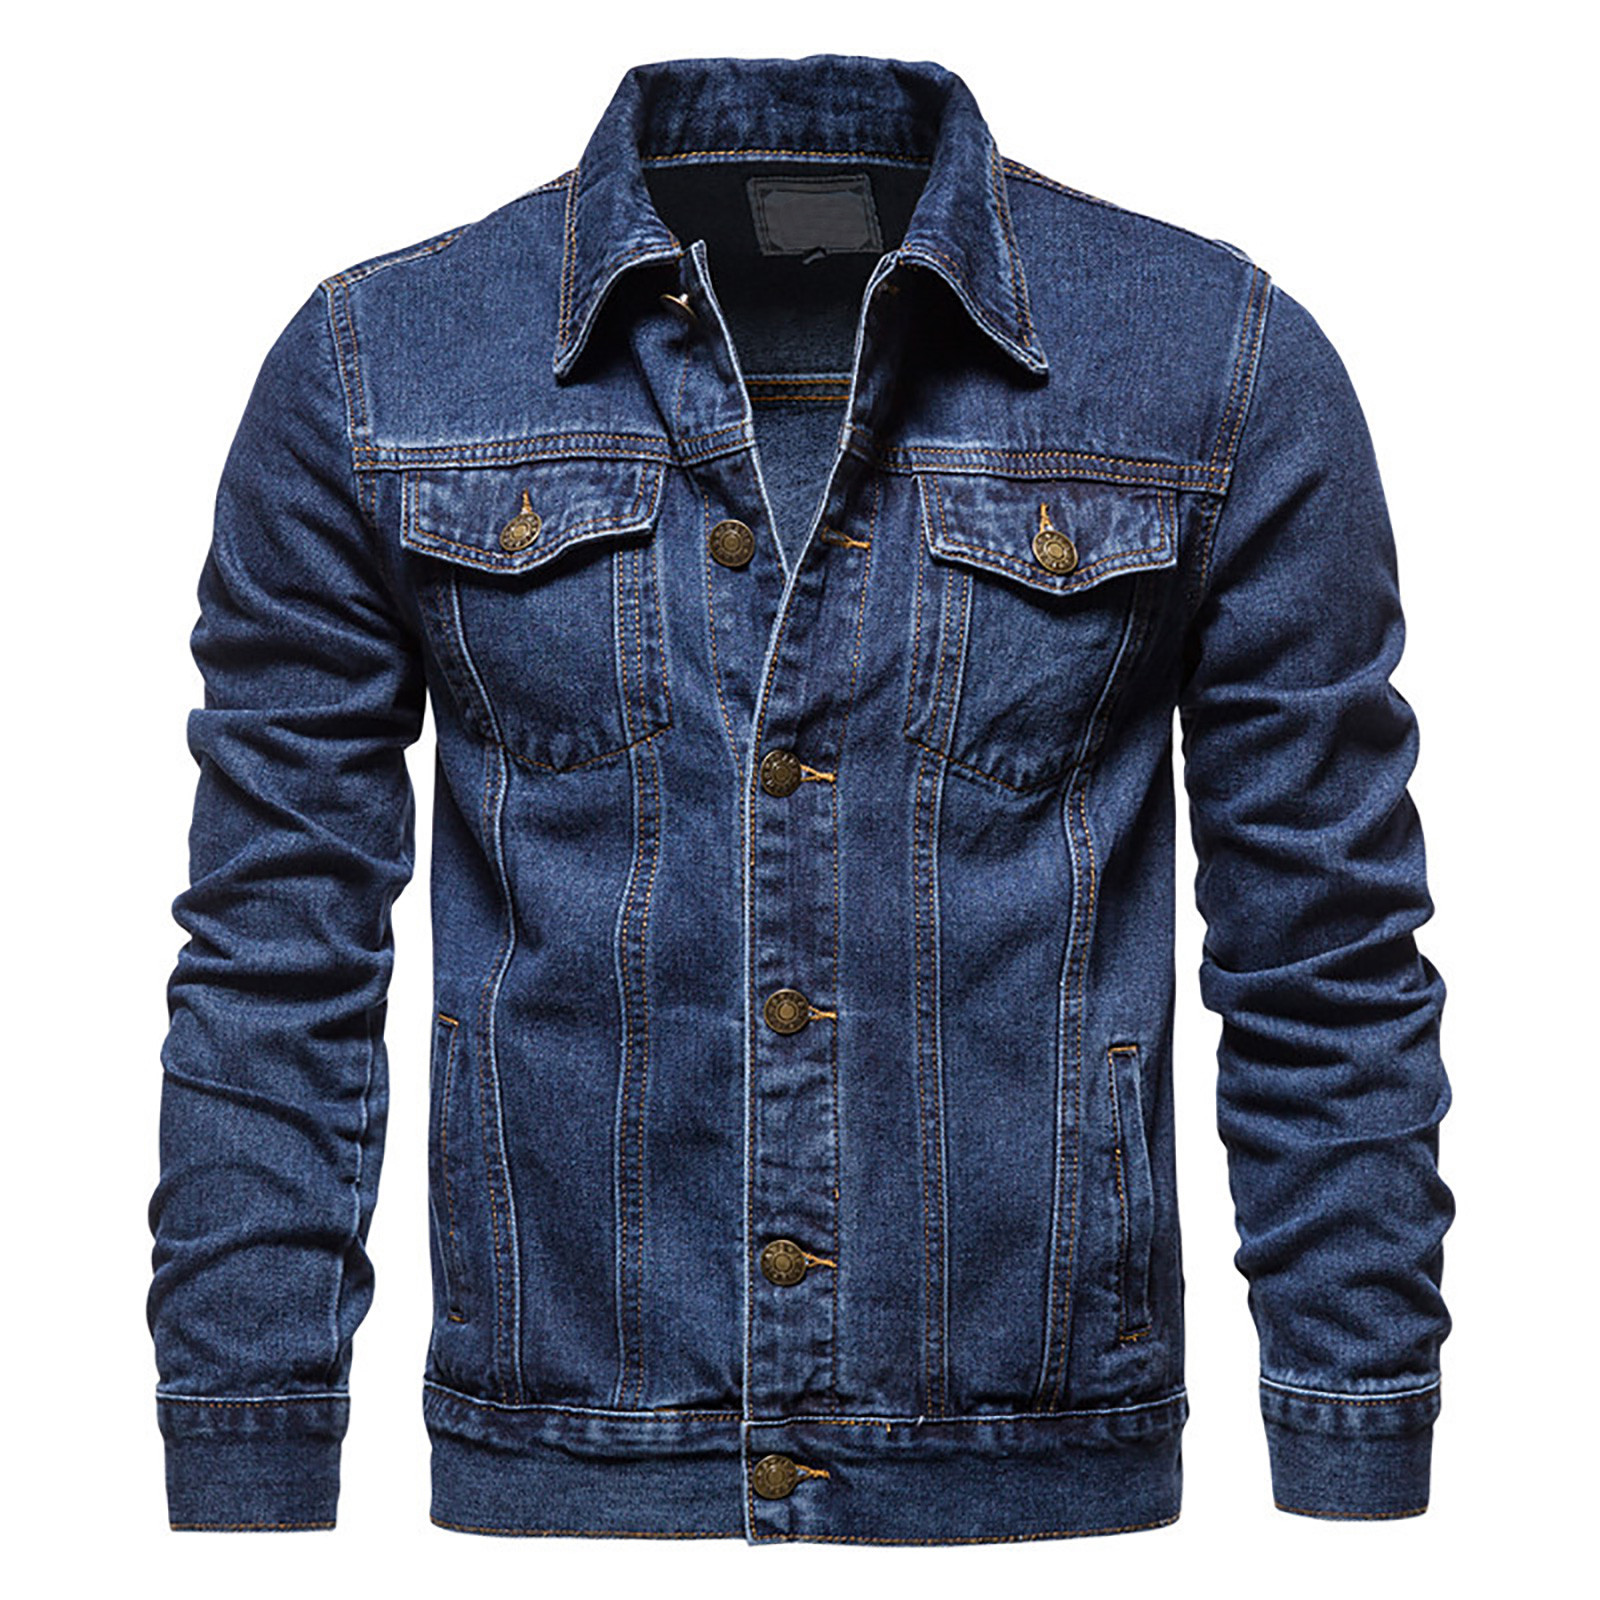 Leesechin Clearance Men's Fashion Big and Tall Jacket Denim Outdoor  Single-breasted Jacket Tooling Jacket Dark Blue 3XL